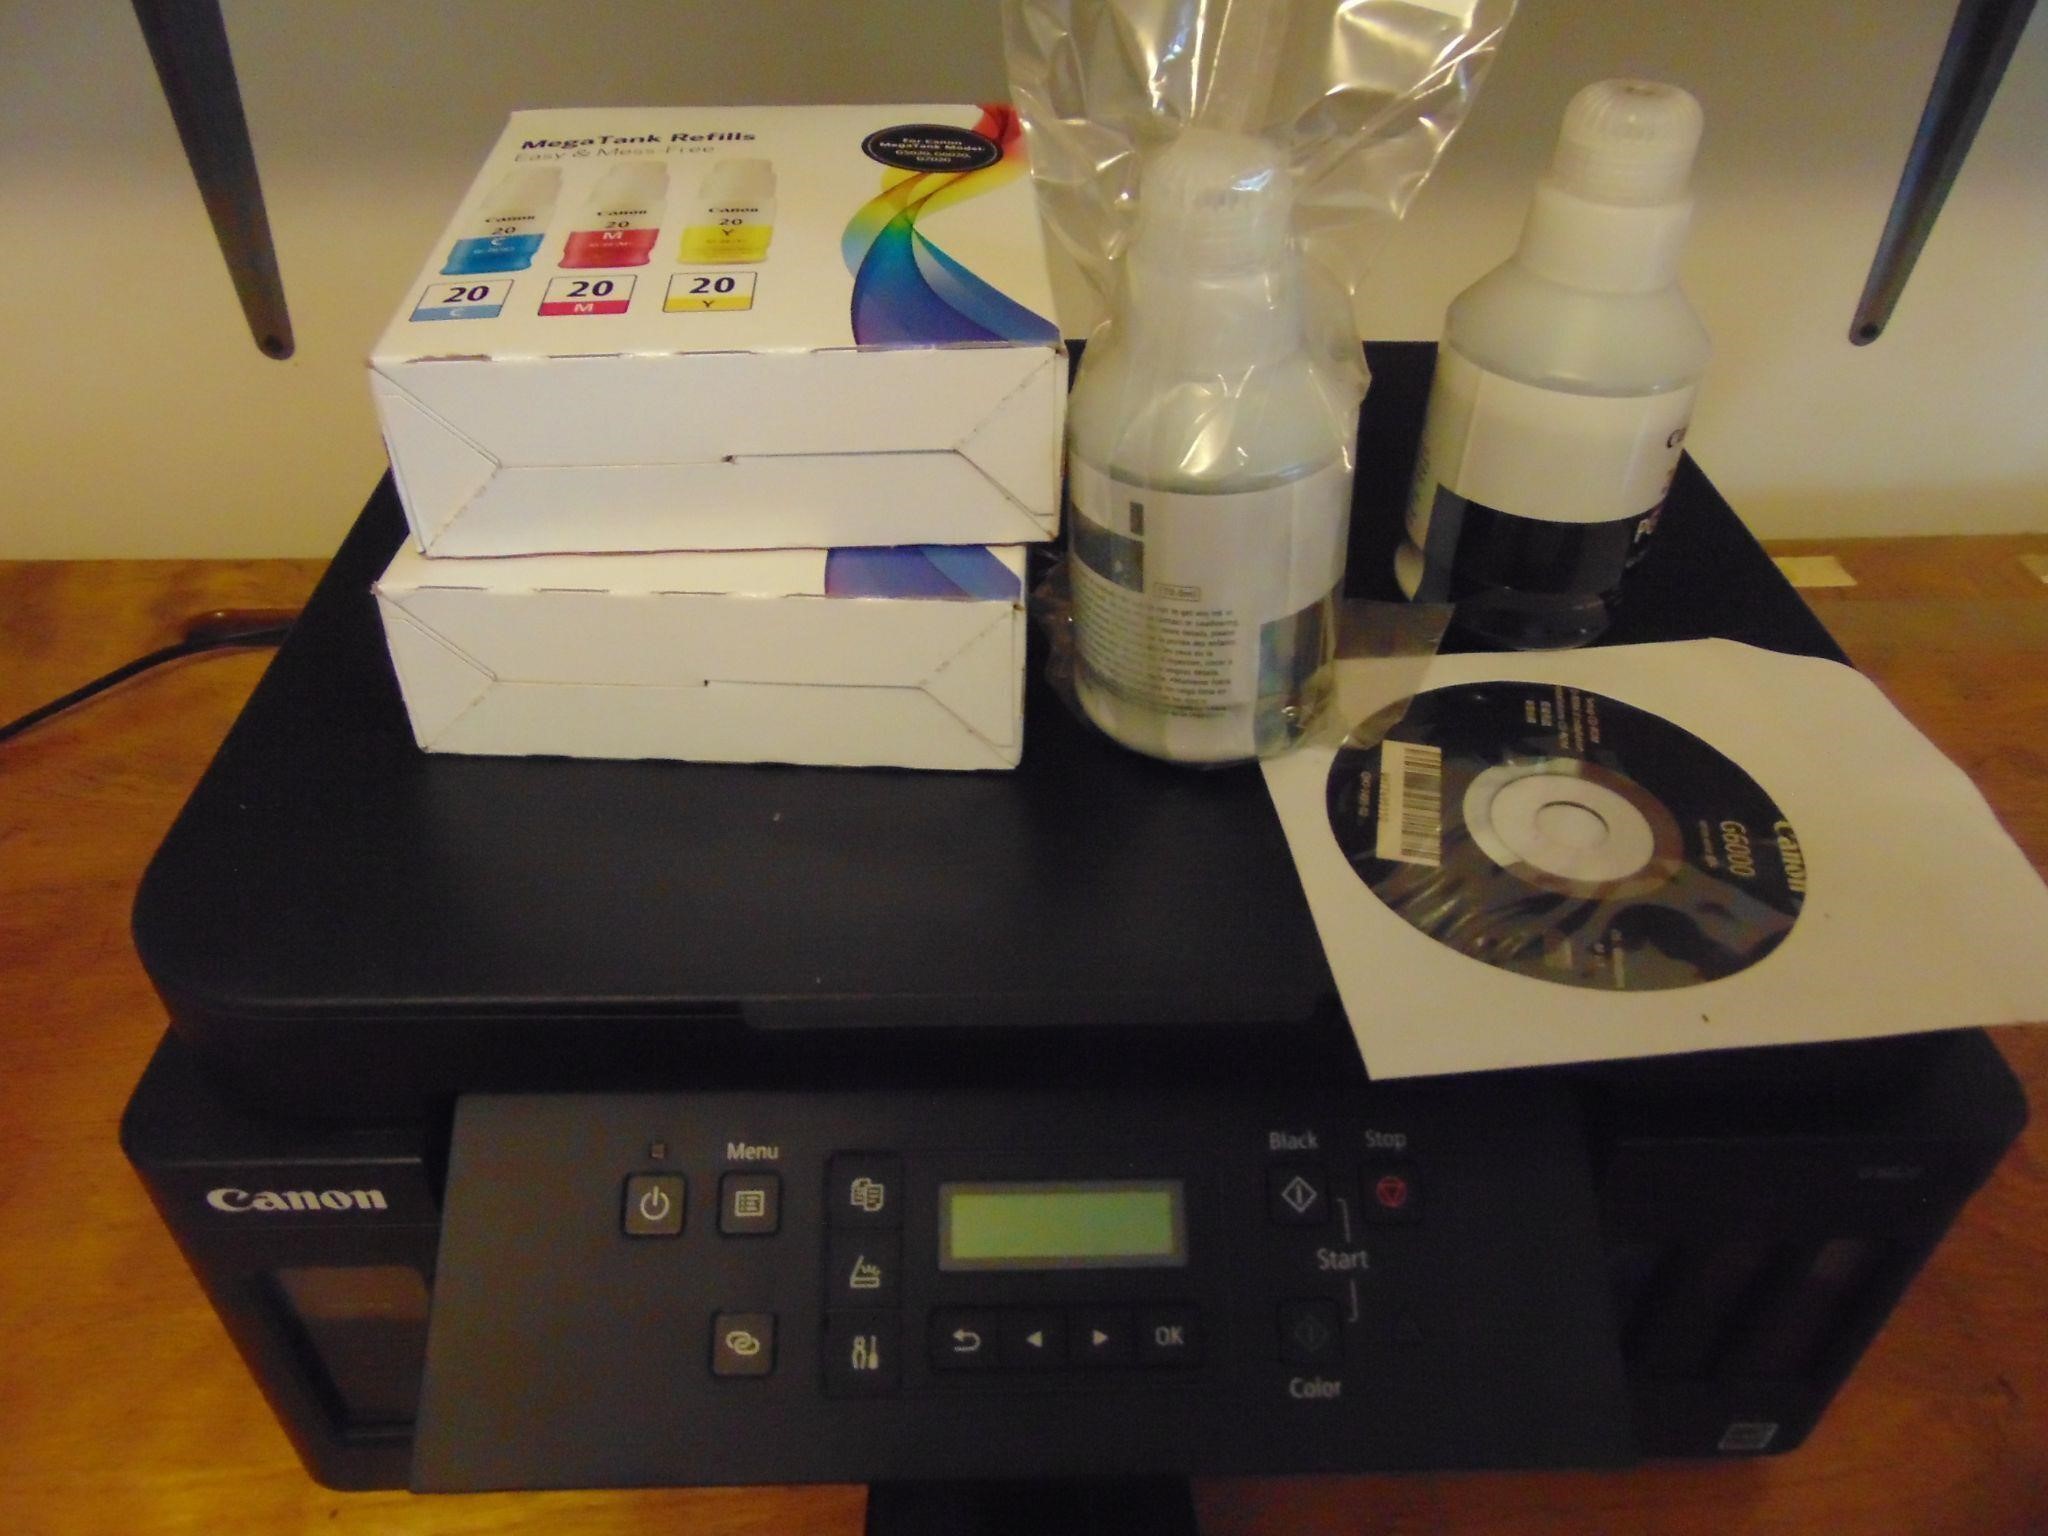 Canon G6020 Color Printer, and Ink